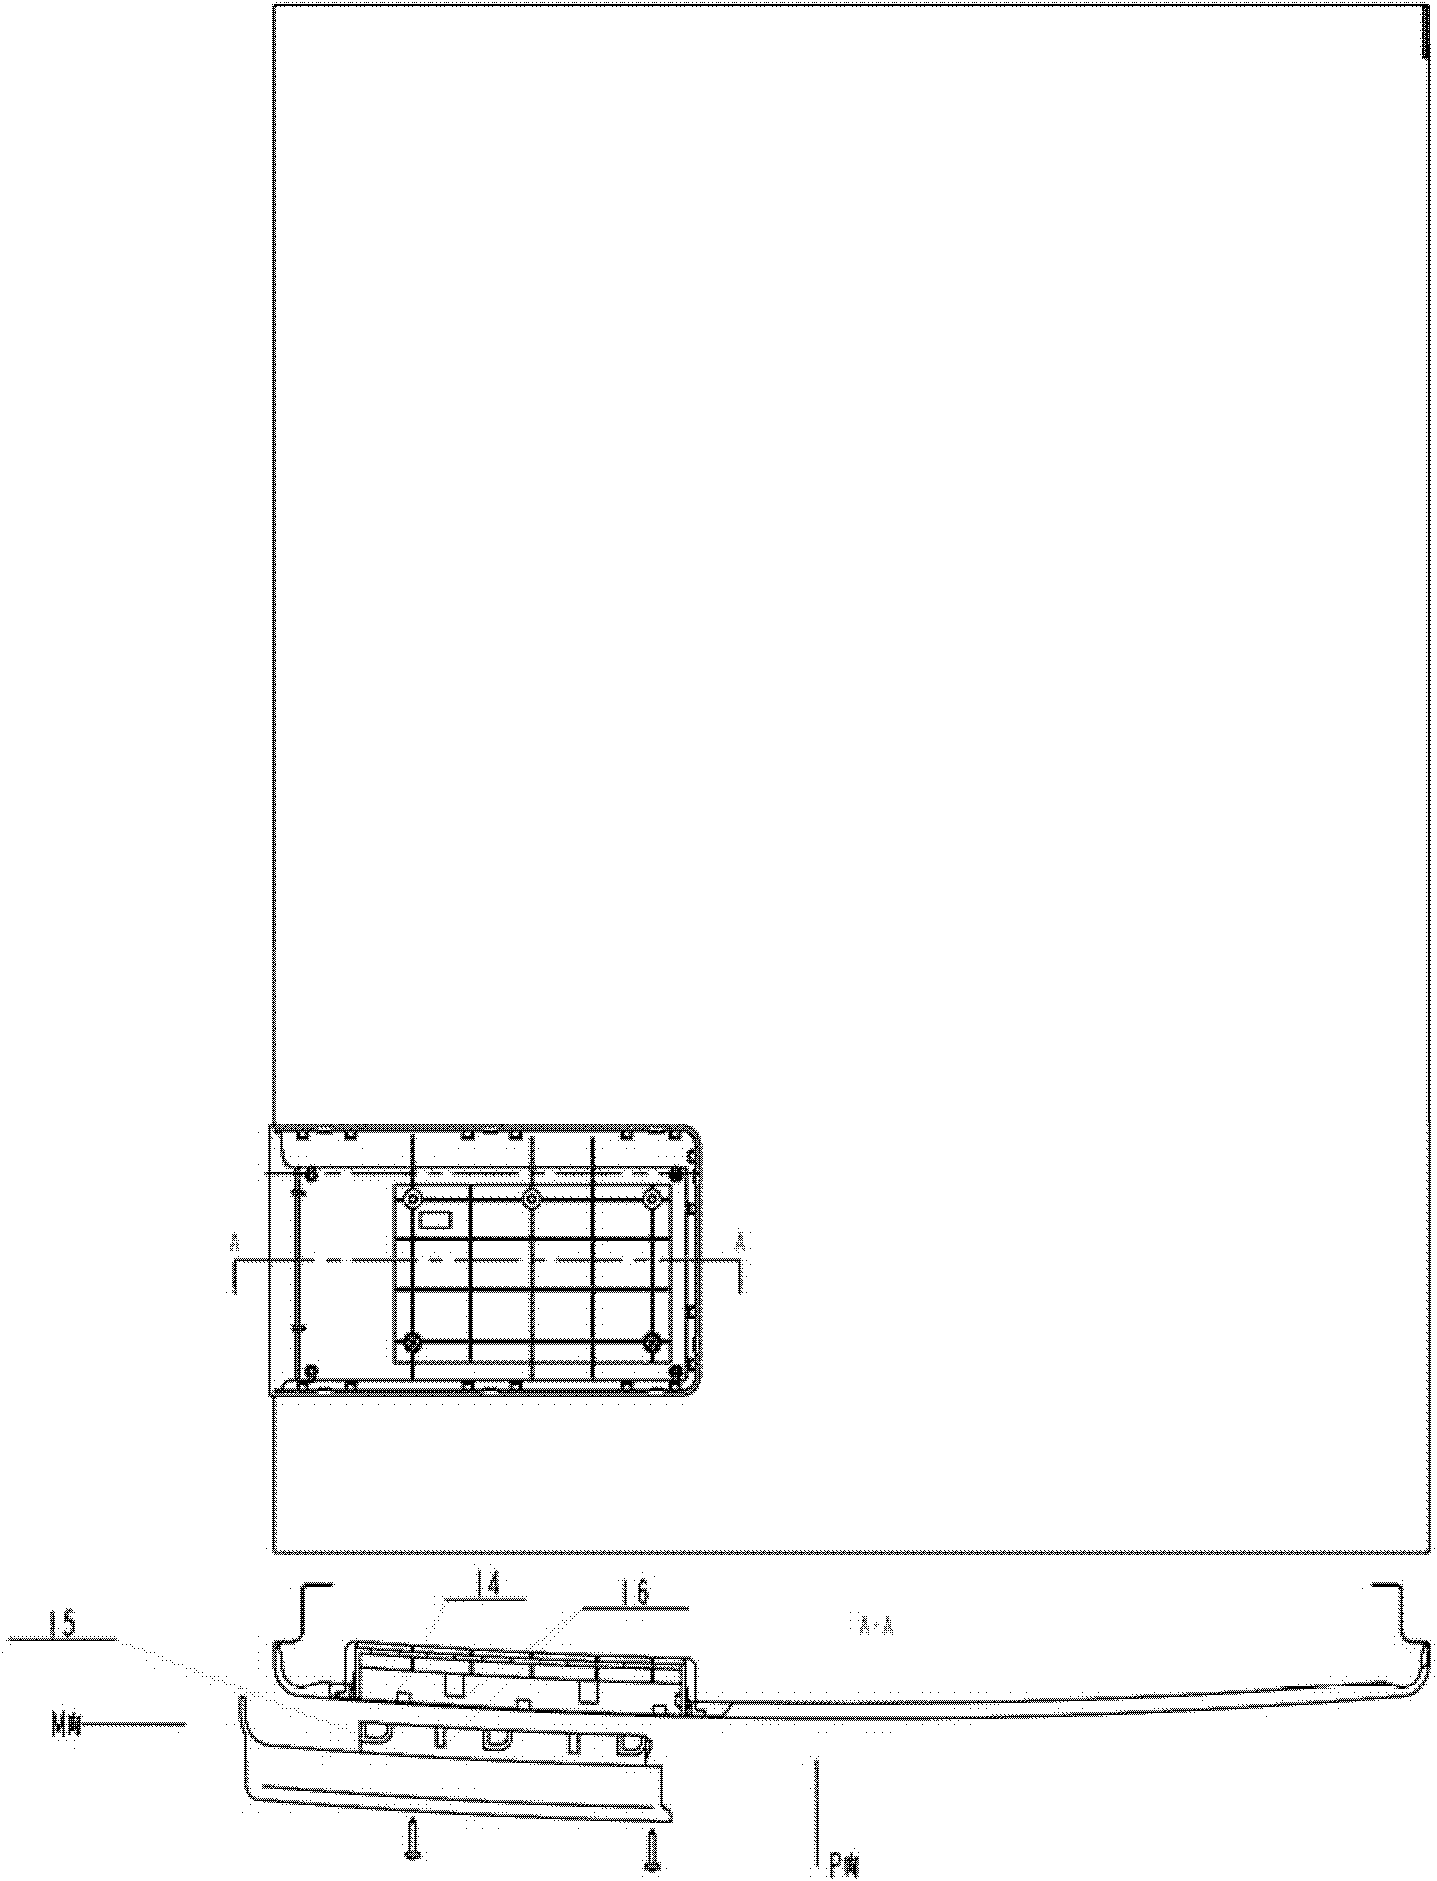 Installing structure for refrigerator display component with handle function